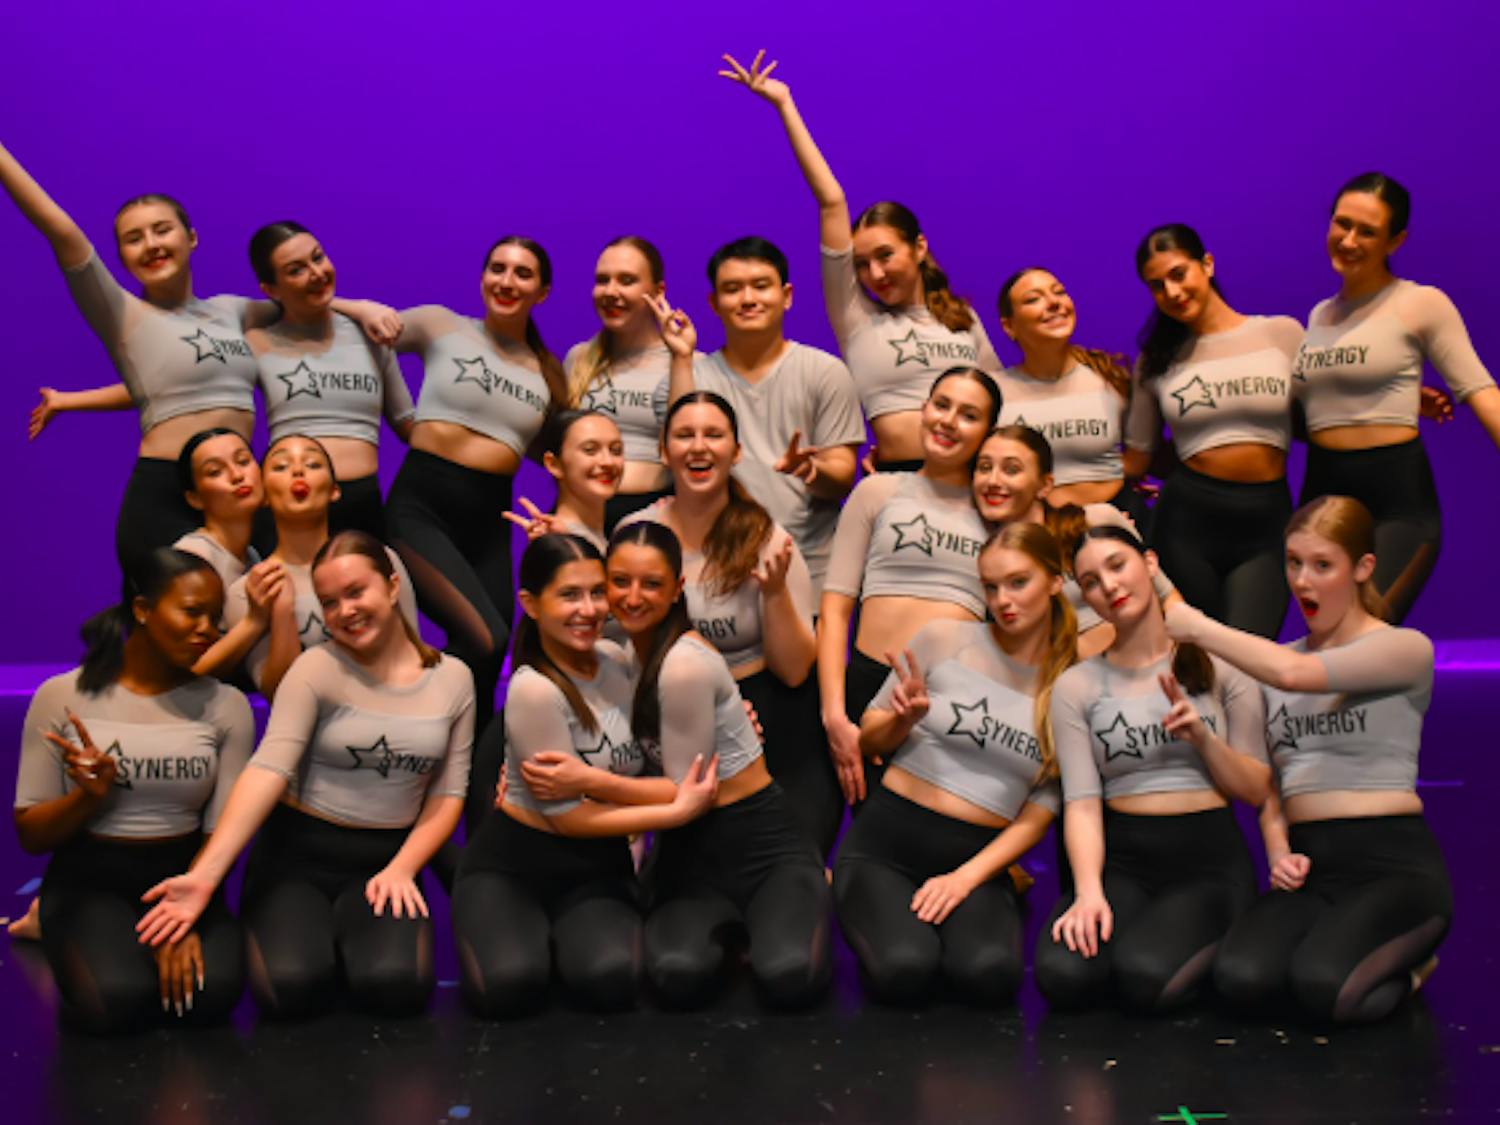 Synergy Dance Company poses for the camera (Photo courtesy of Lauren Schweighardt).